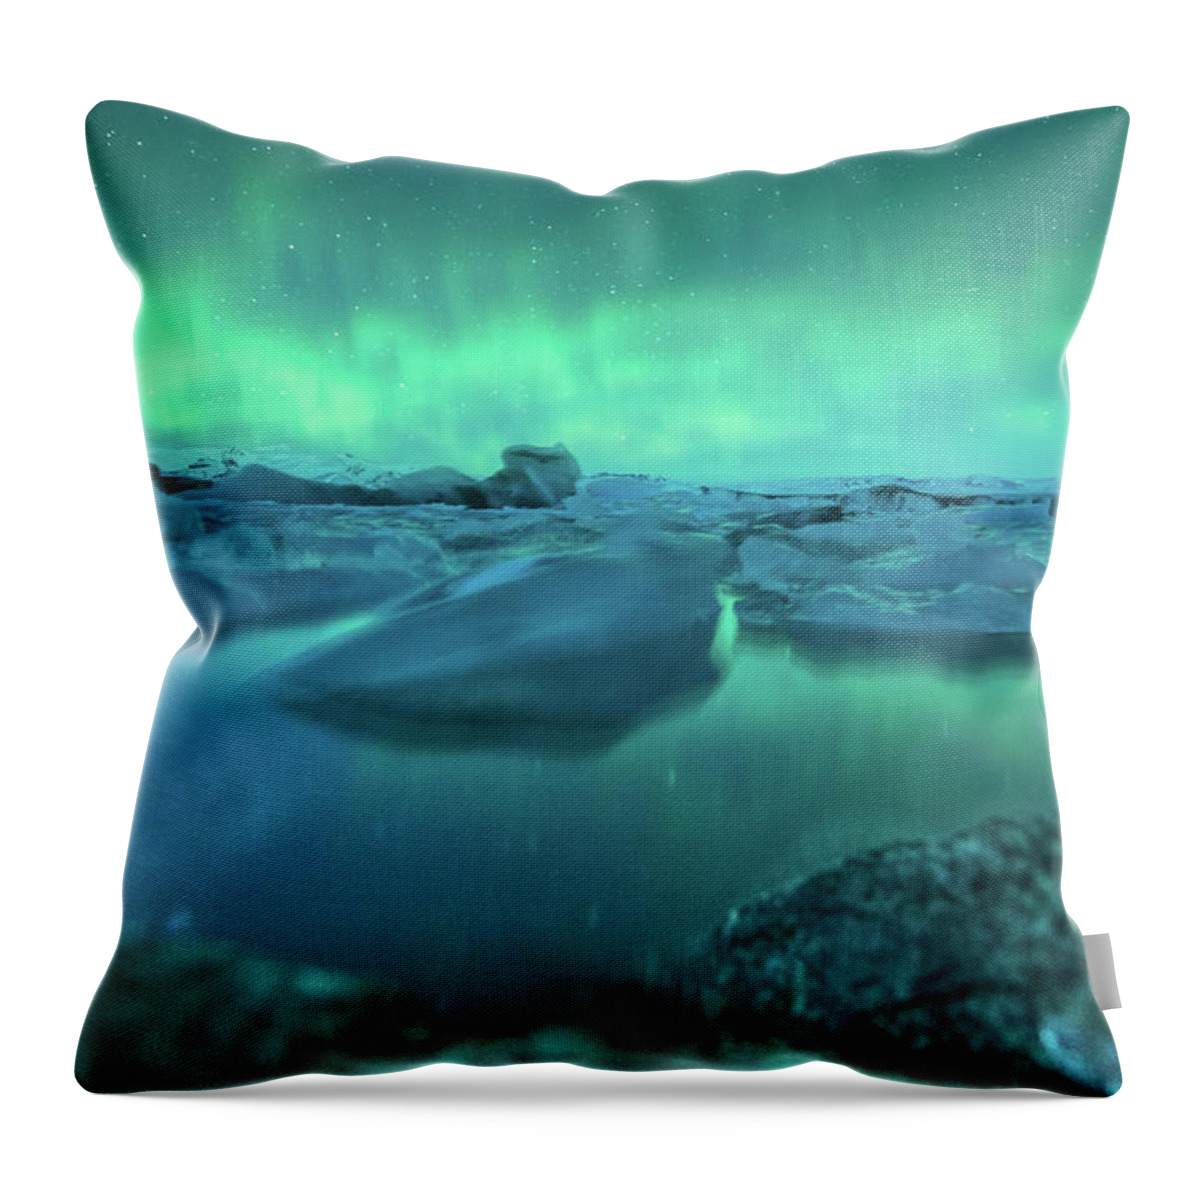 Scenics Throw Pillow featuring the photograph Jokusarlon Glacial Lake With Aurora by Coolbiere Photograph